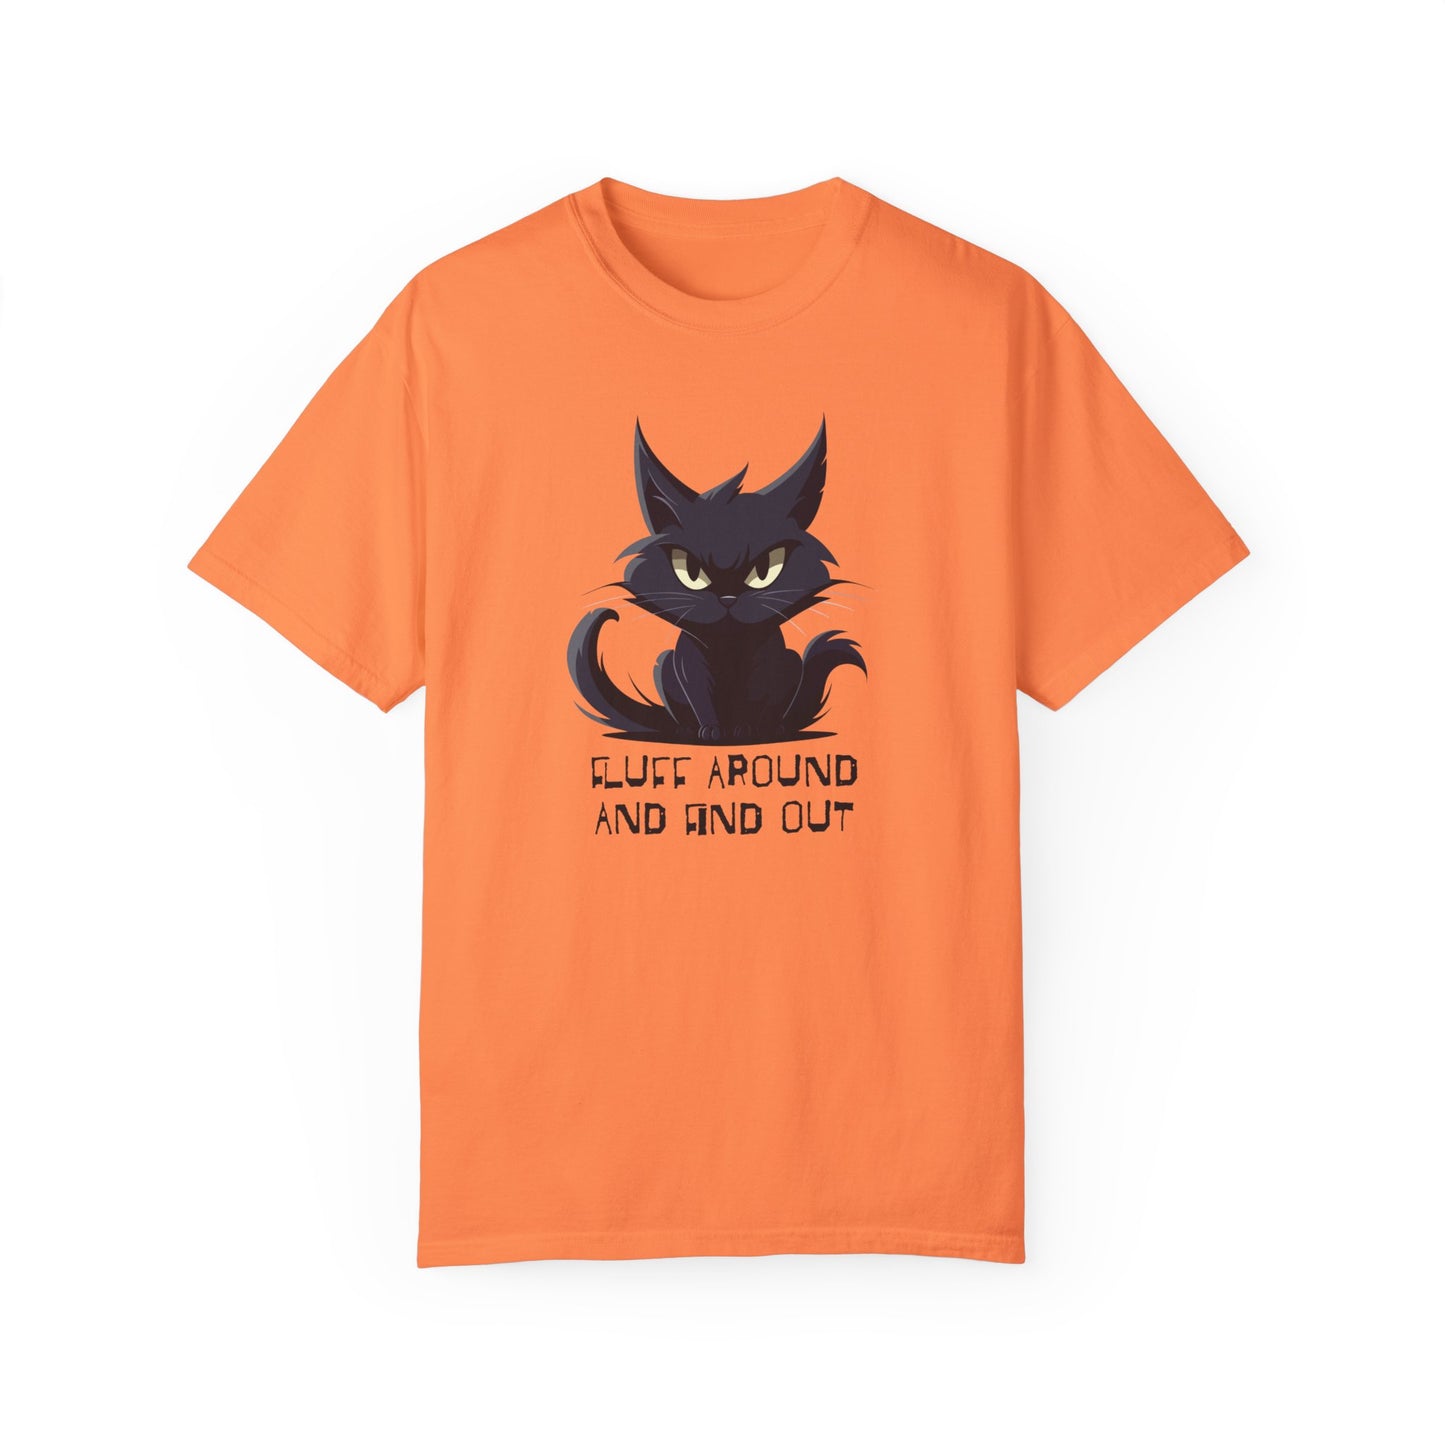 Sarcastic Cat T-Shirt For Funny Animated Feline TShirt For Sassy Cat Lover T Shirt Gift